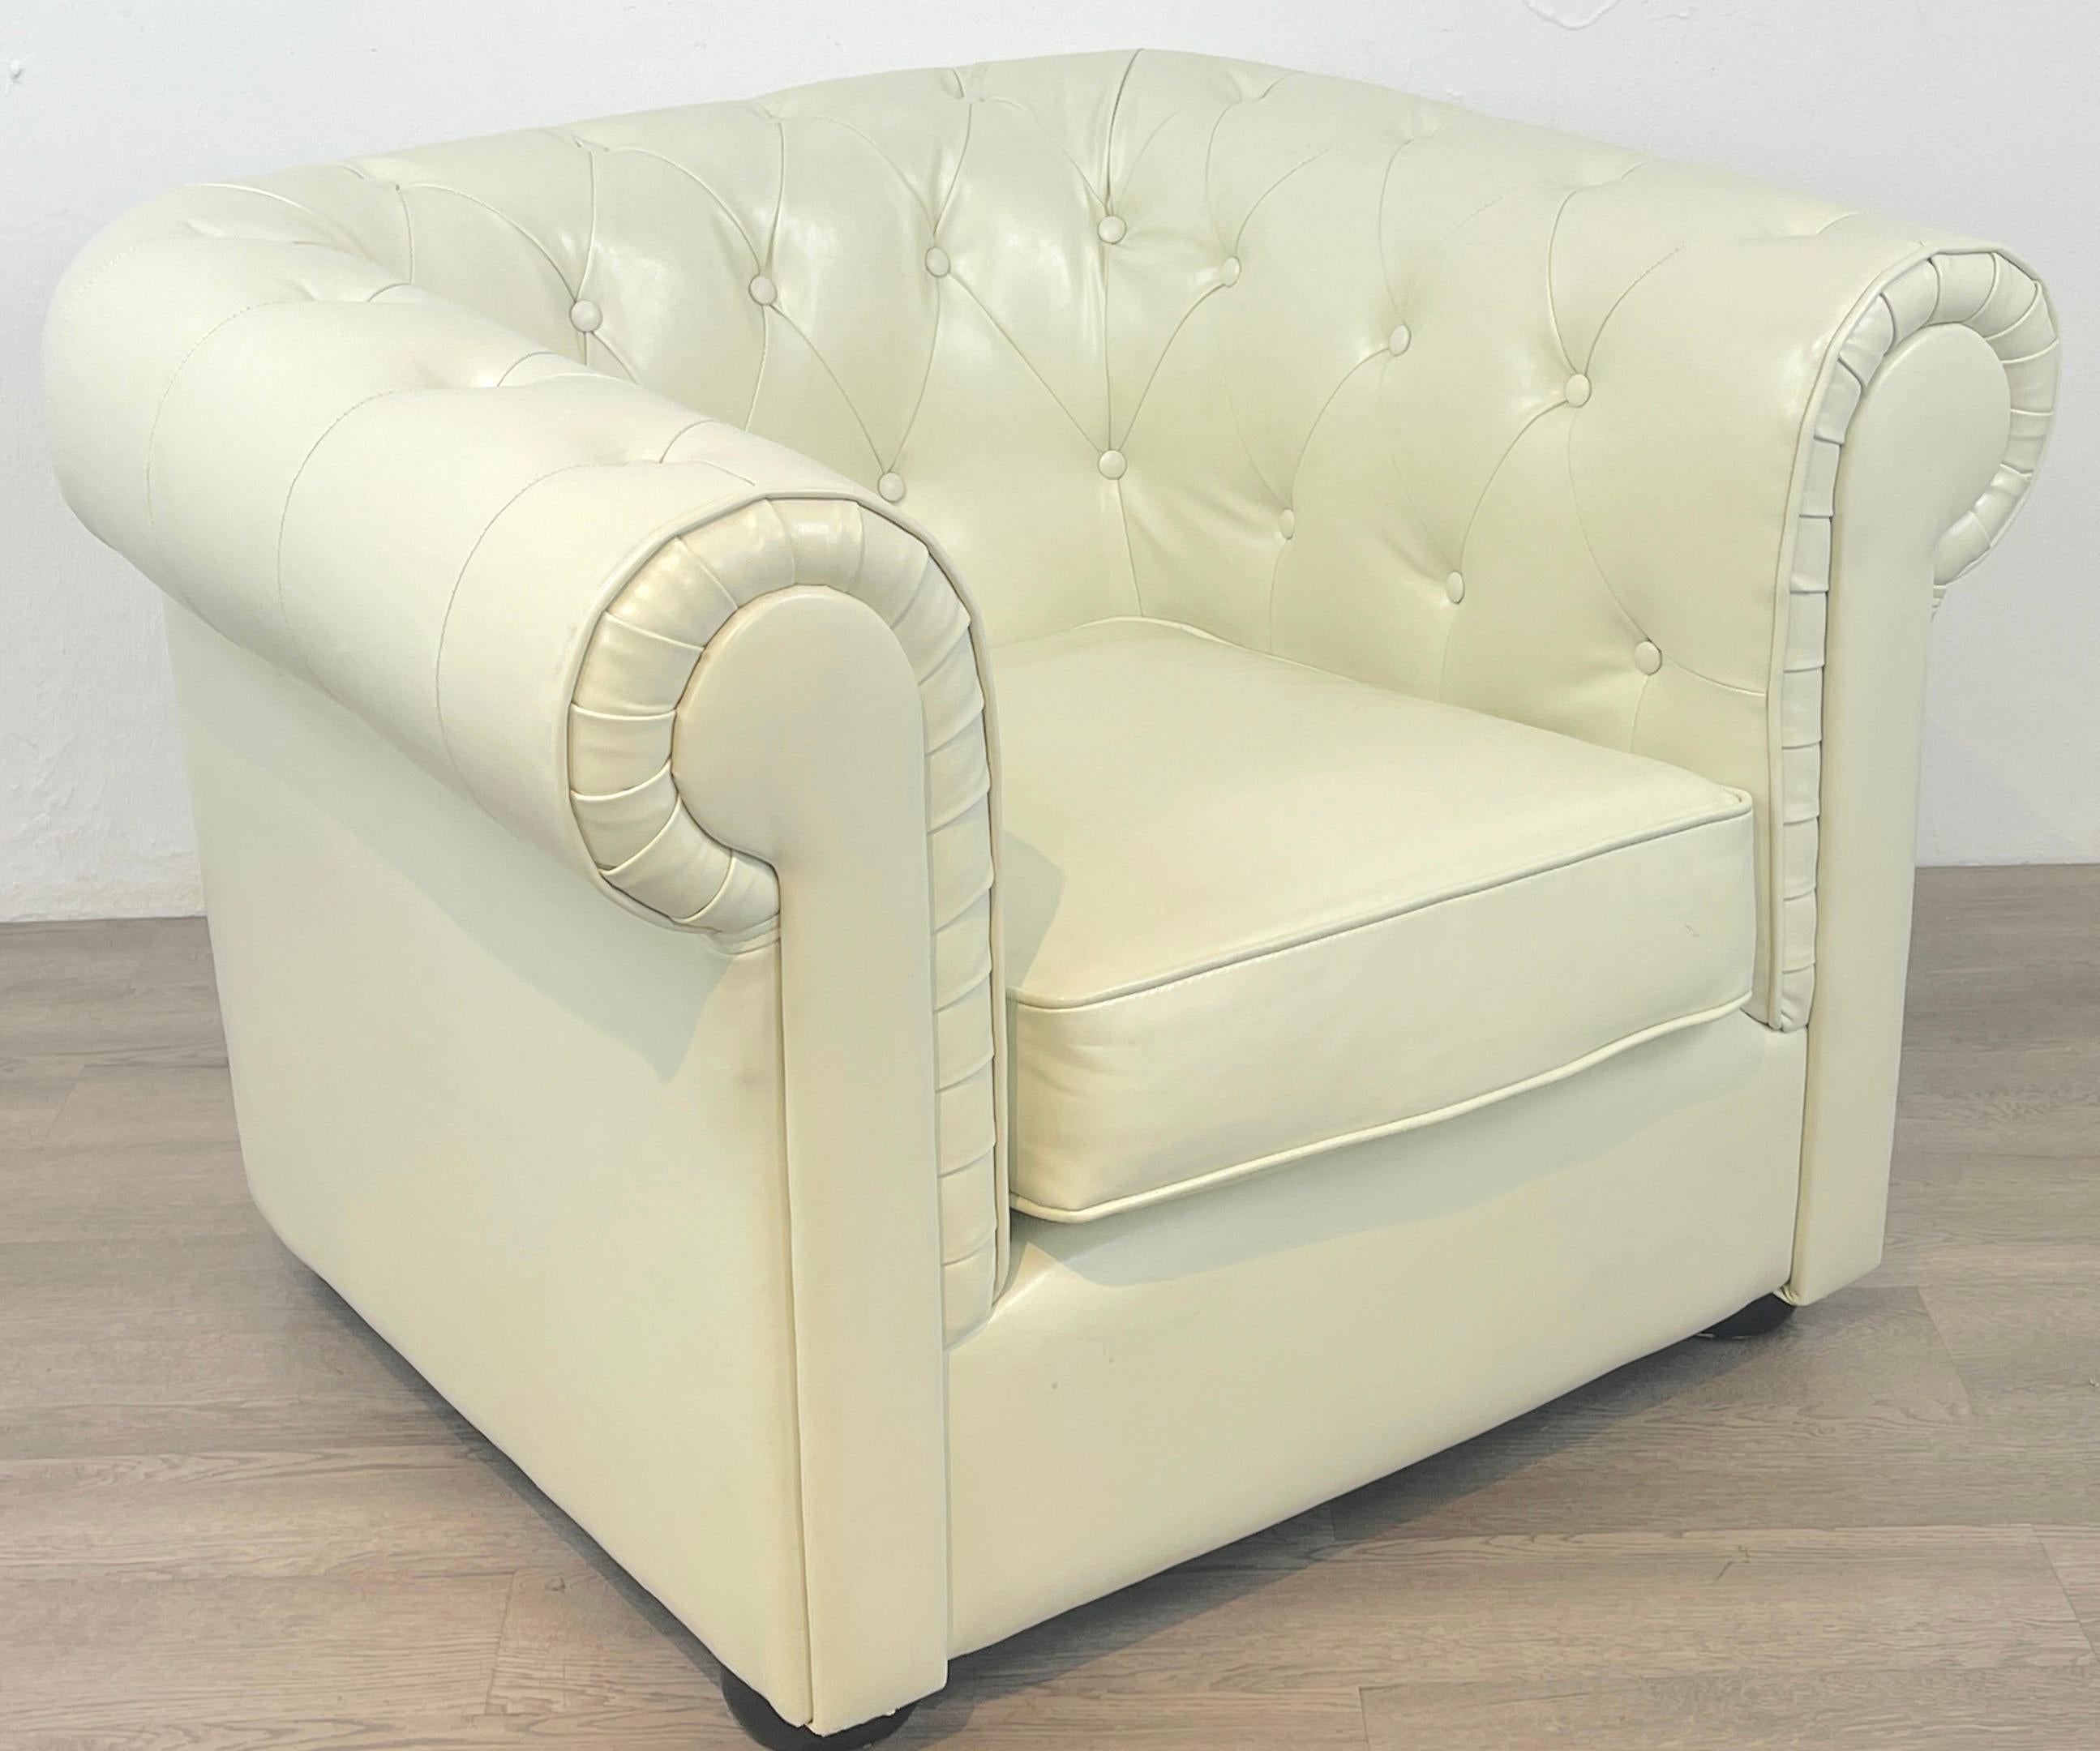 Pair of White Leather Chesterfield Club Chairs For Sale at 1stDibs